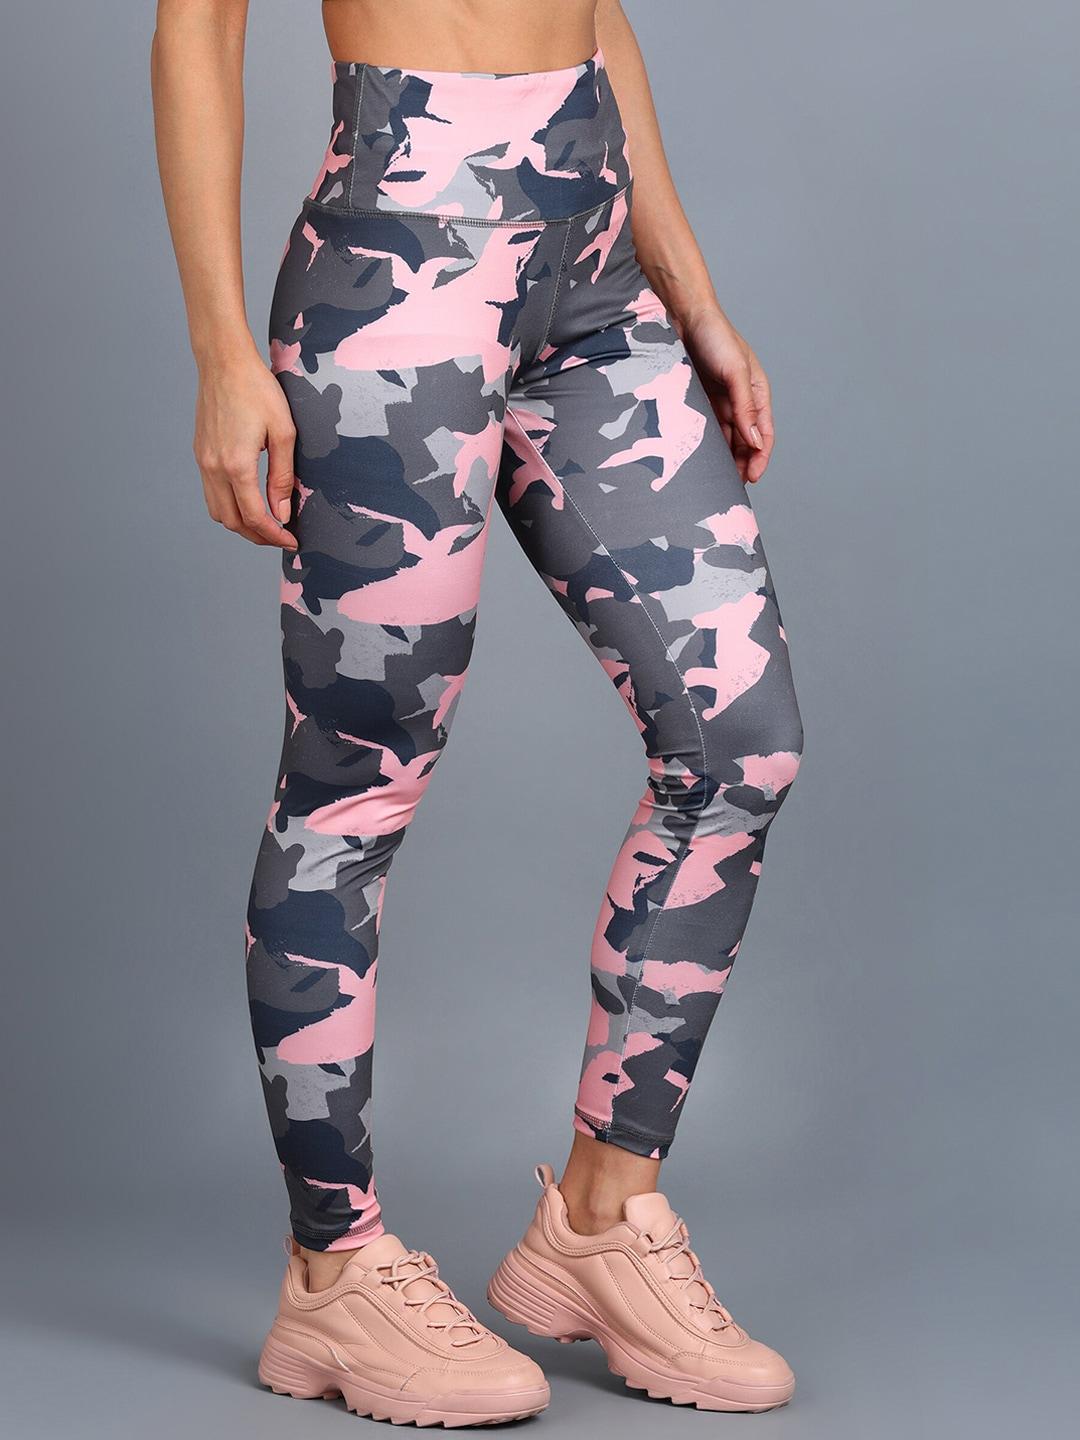 rock paper scissors women peach coloured camouflage printed ankle length training tights